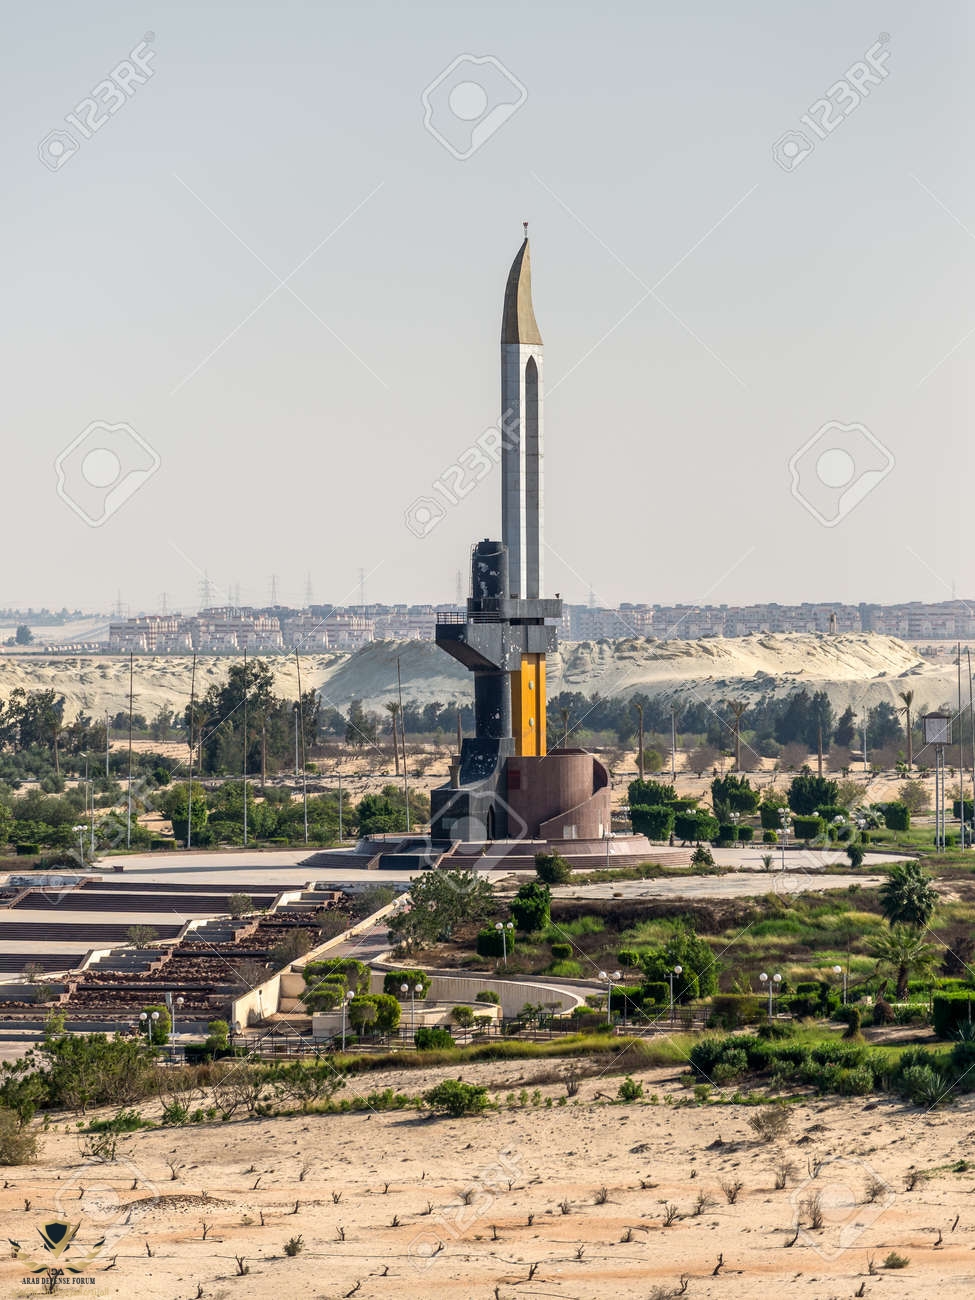 154117103-ismailia-egypt-november-14-2019-a-monument-in-the-shape-of-an-ak-47-muzzle-and-bayon...jpg